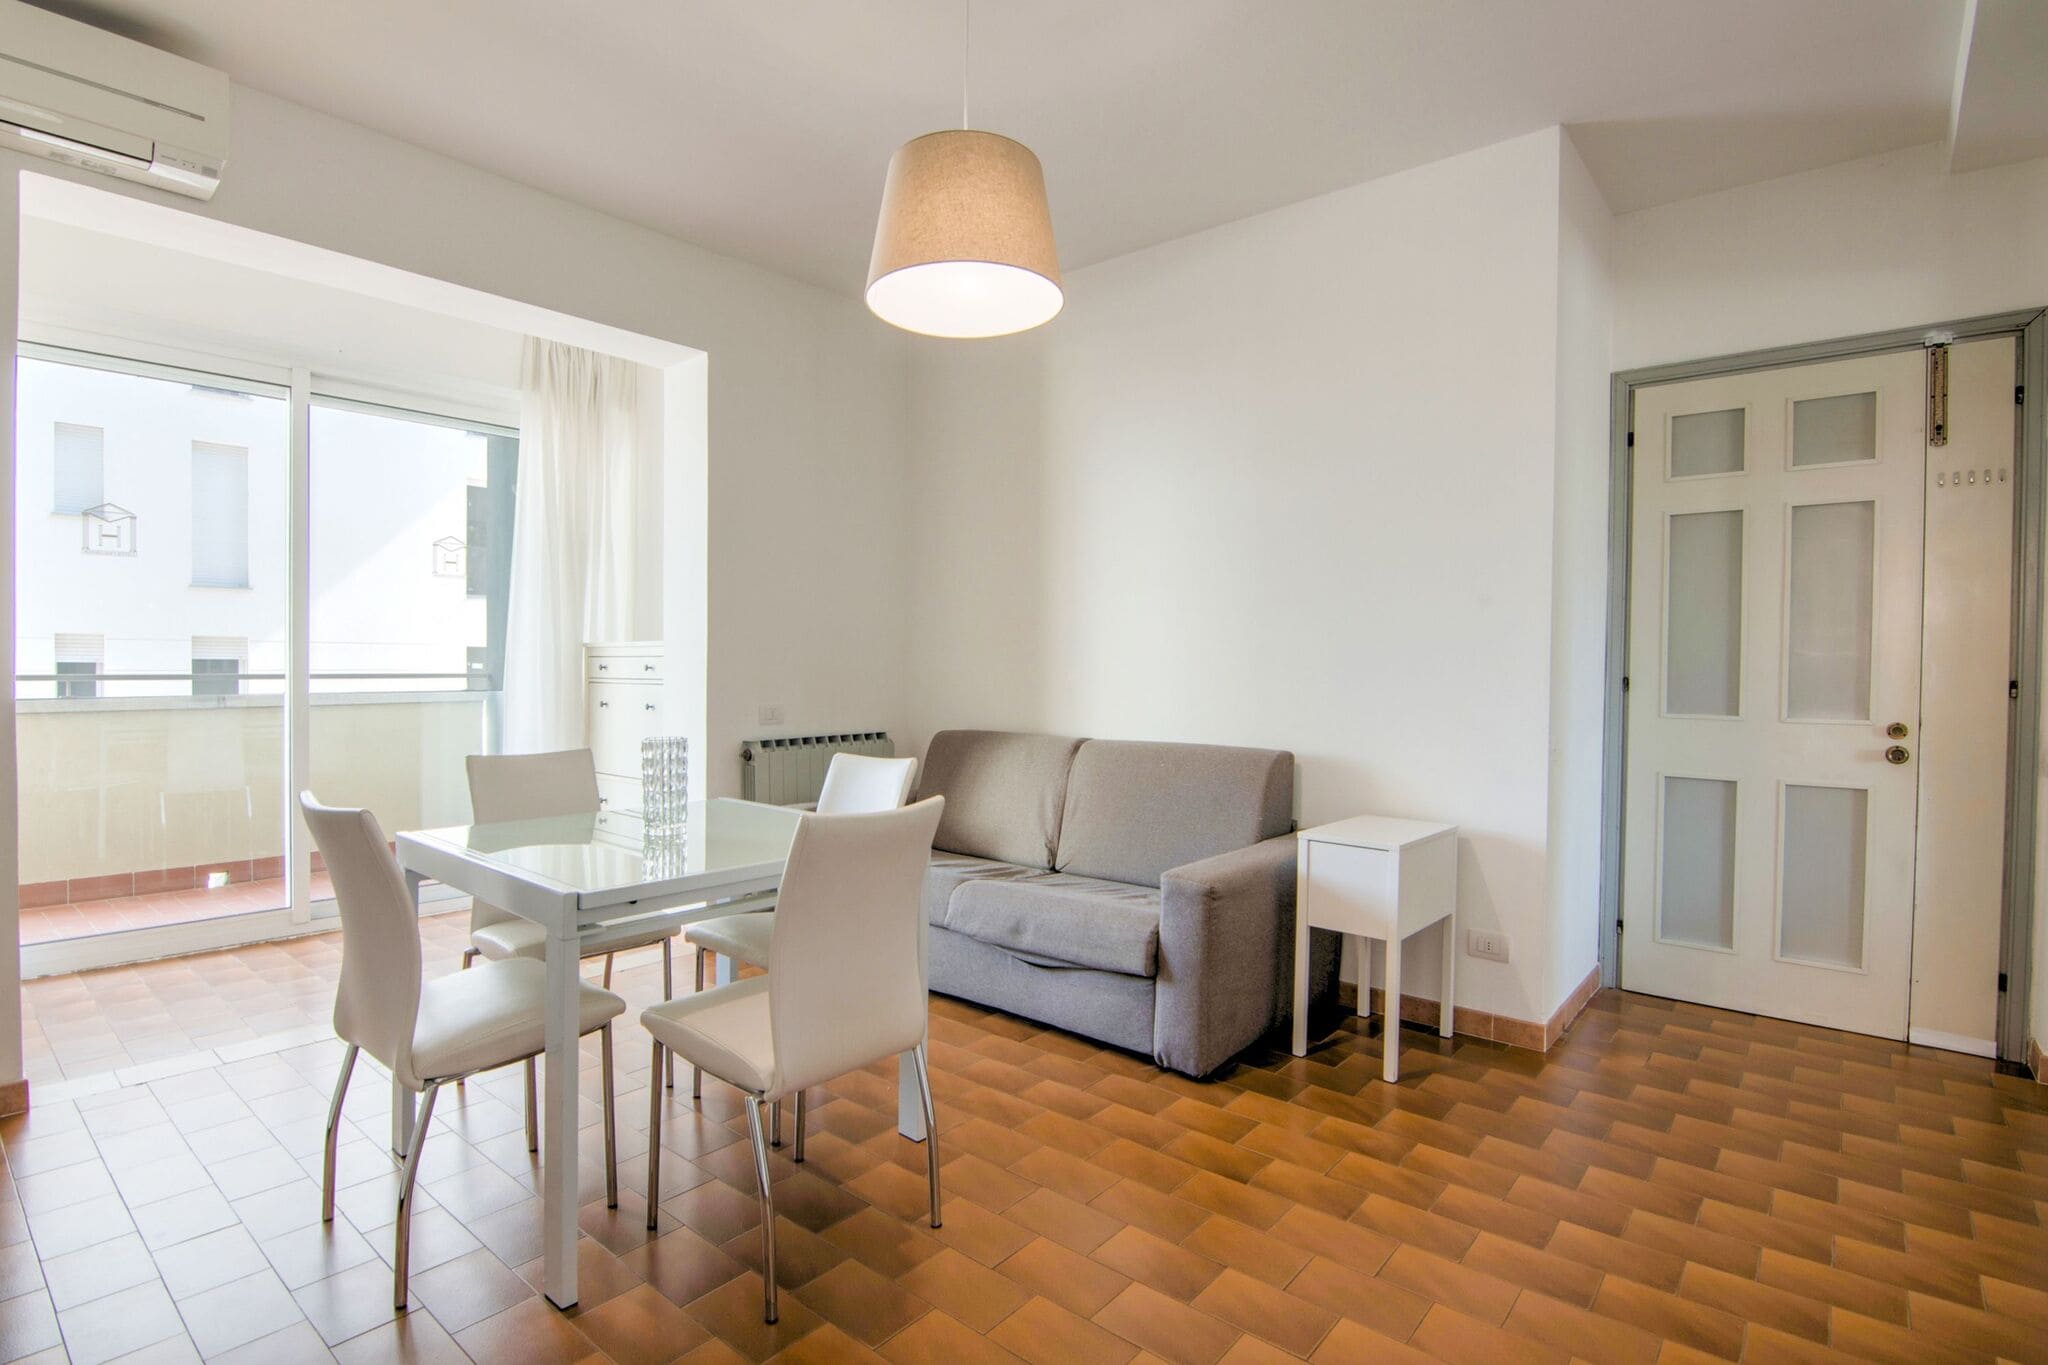 Renovated apartment in northern zone of Riccione, 100 meters from the sea.